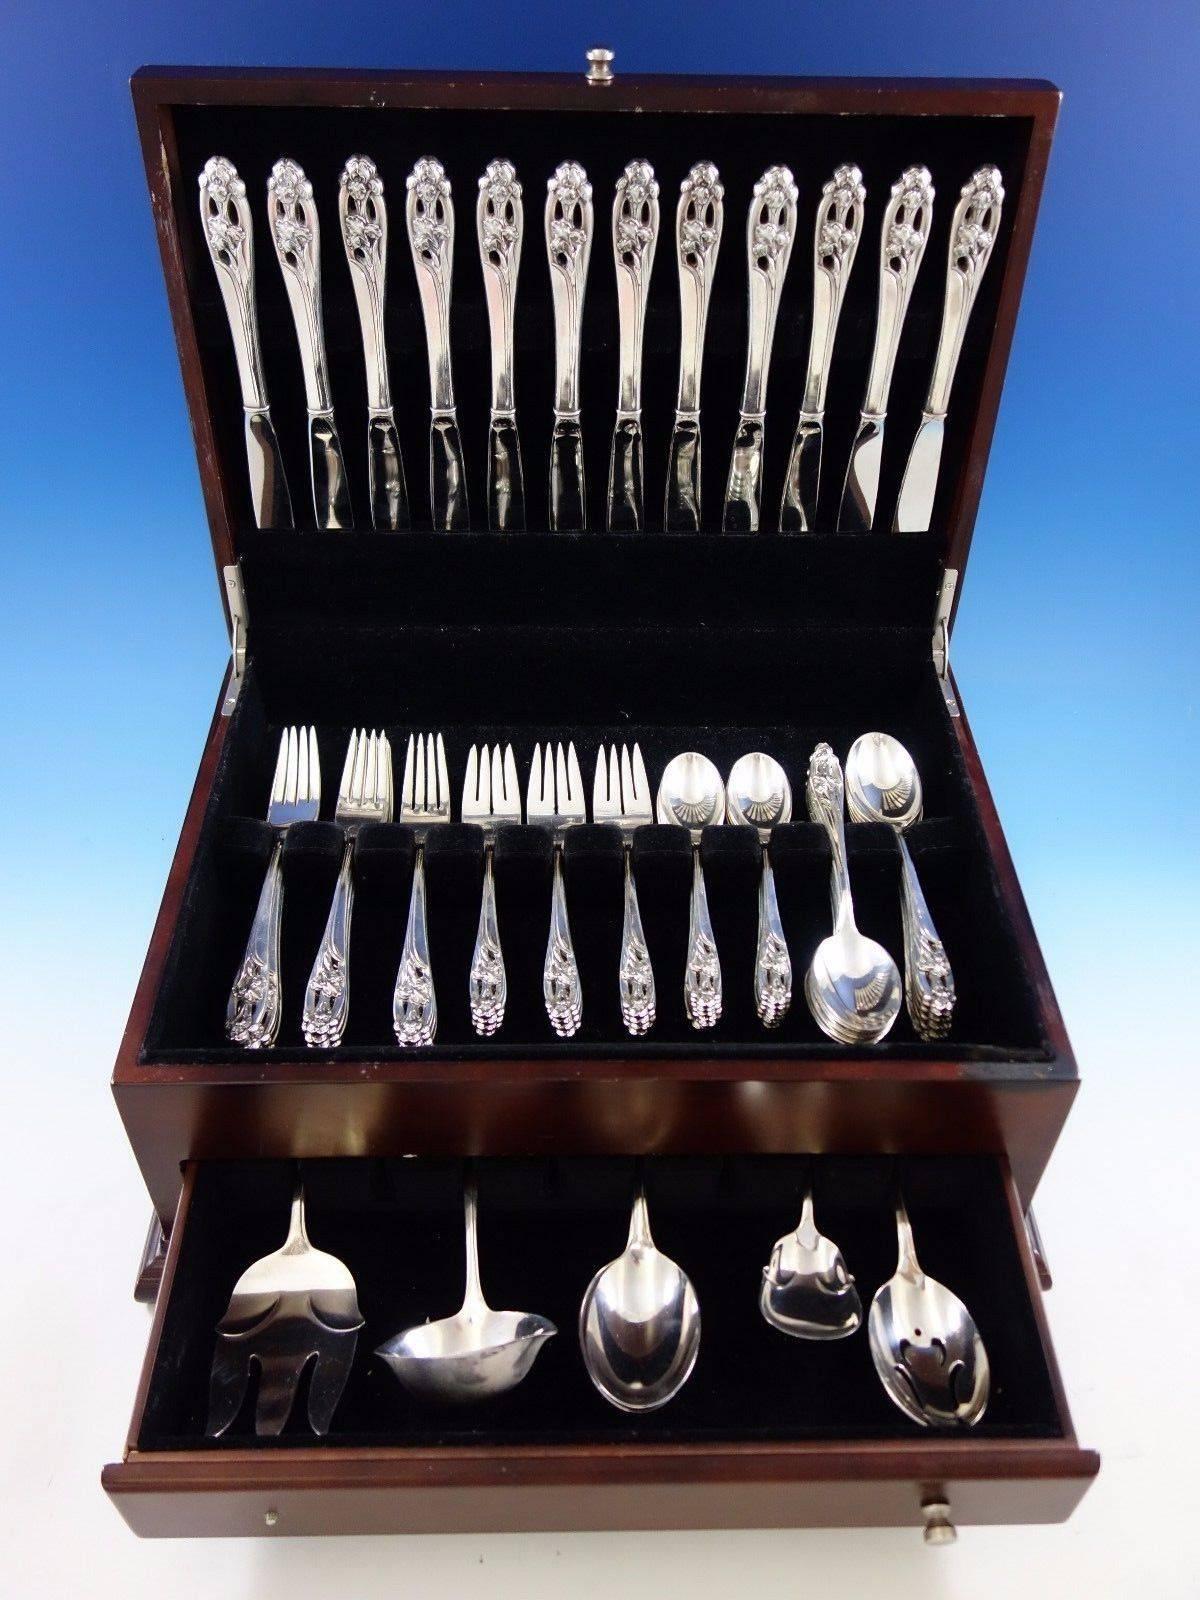 Silver Iris by International sterling silver flatware set with pierced handle, 65 pieces. This set includes: 

12 knives, 9